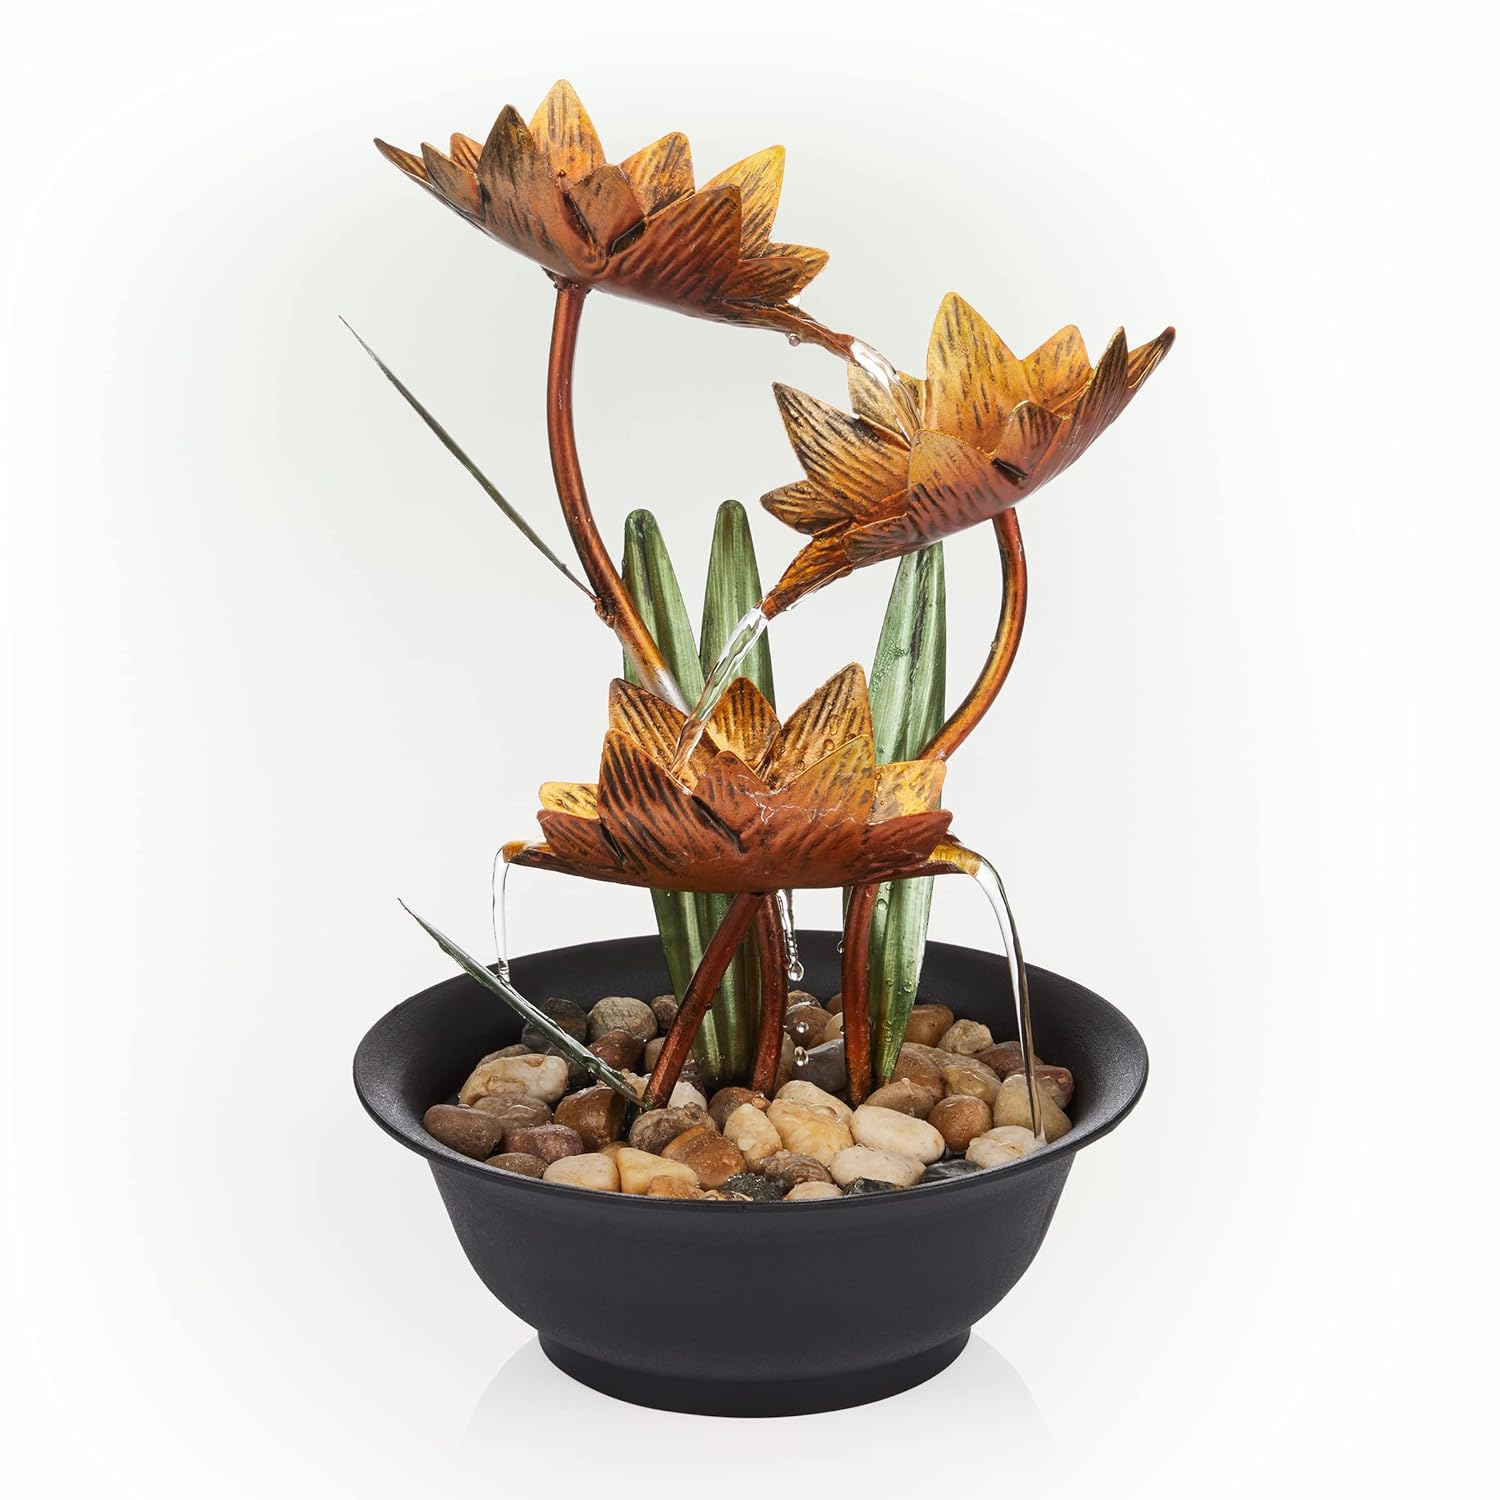 TKM Home Alpine Corporation 13" H Indoor Multi-Tier Metal Lotus Flower Tabletop Fountain with Stone-Filled Base